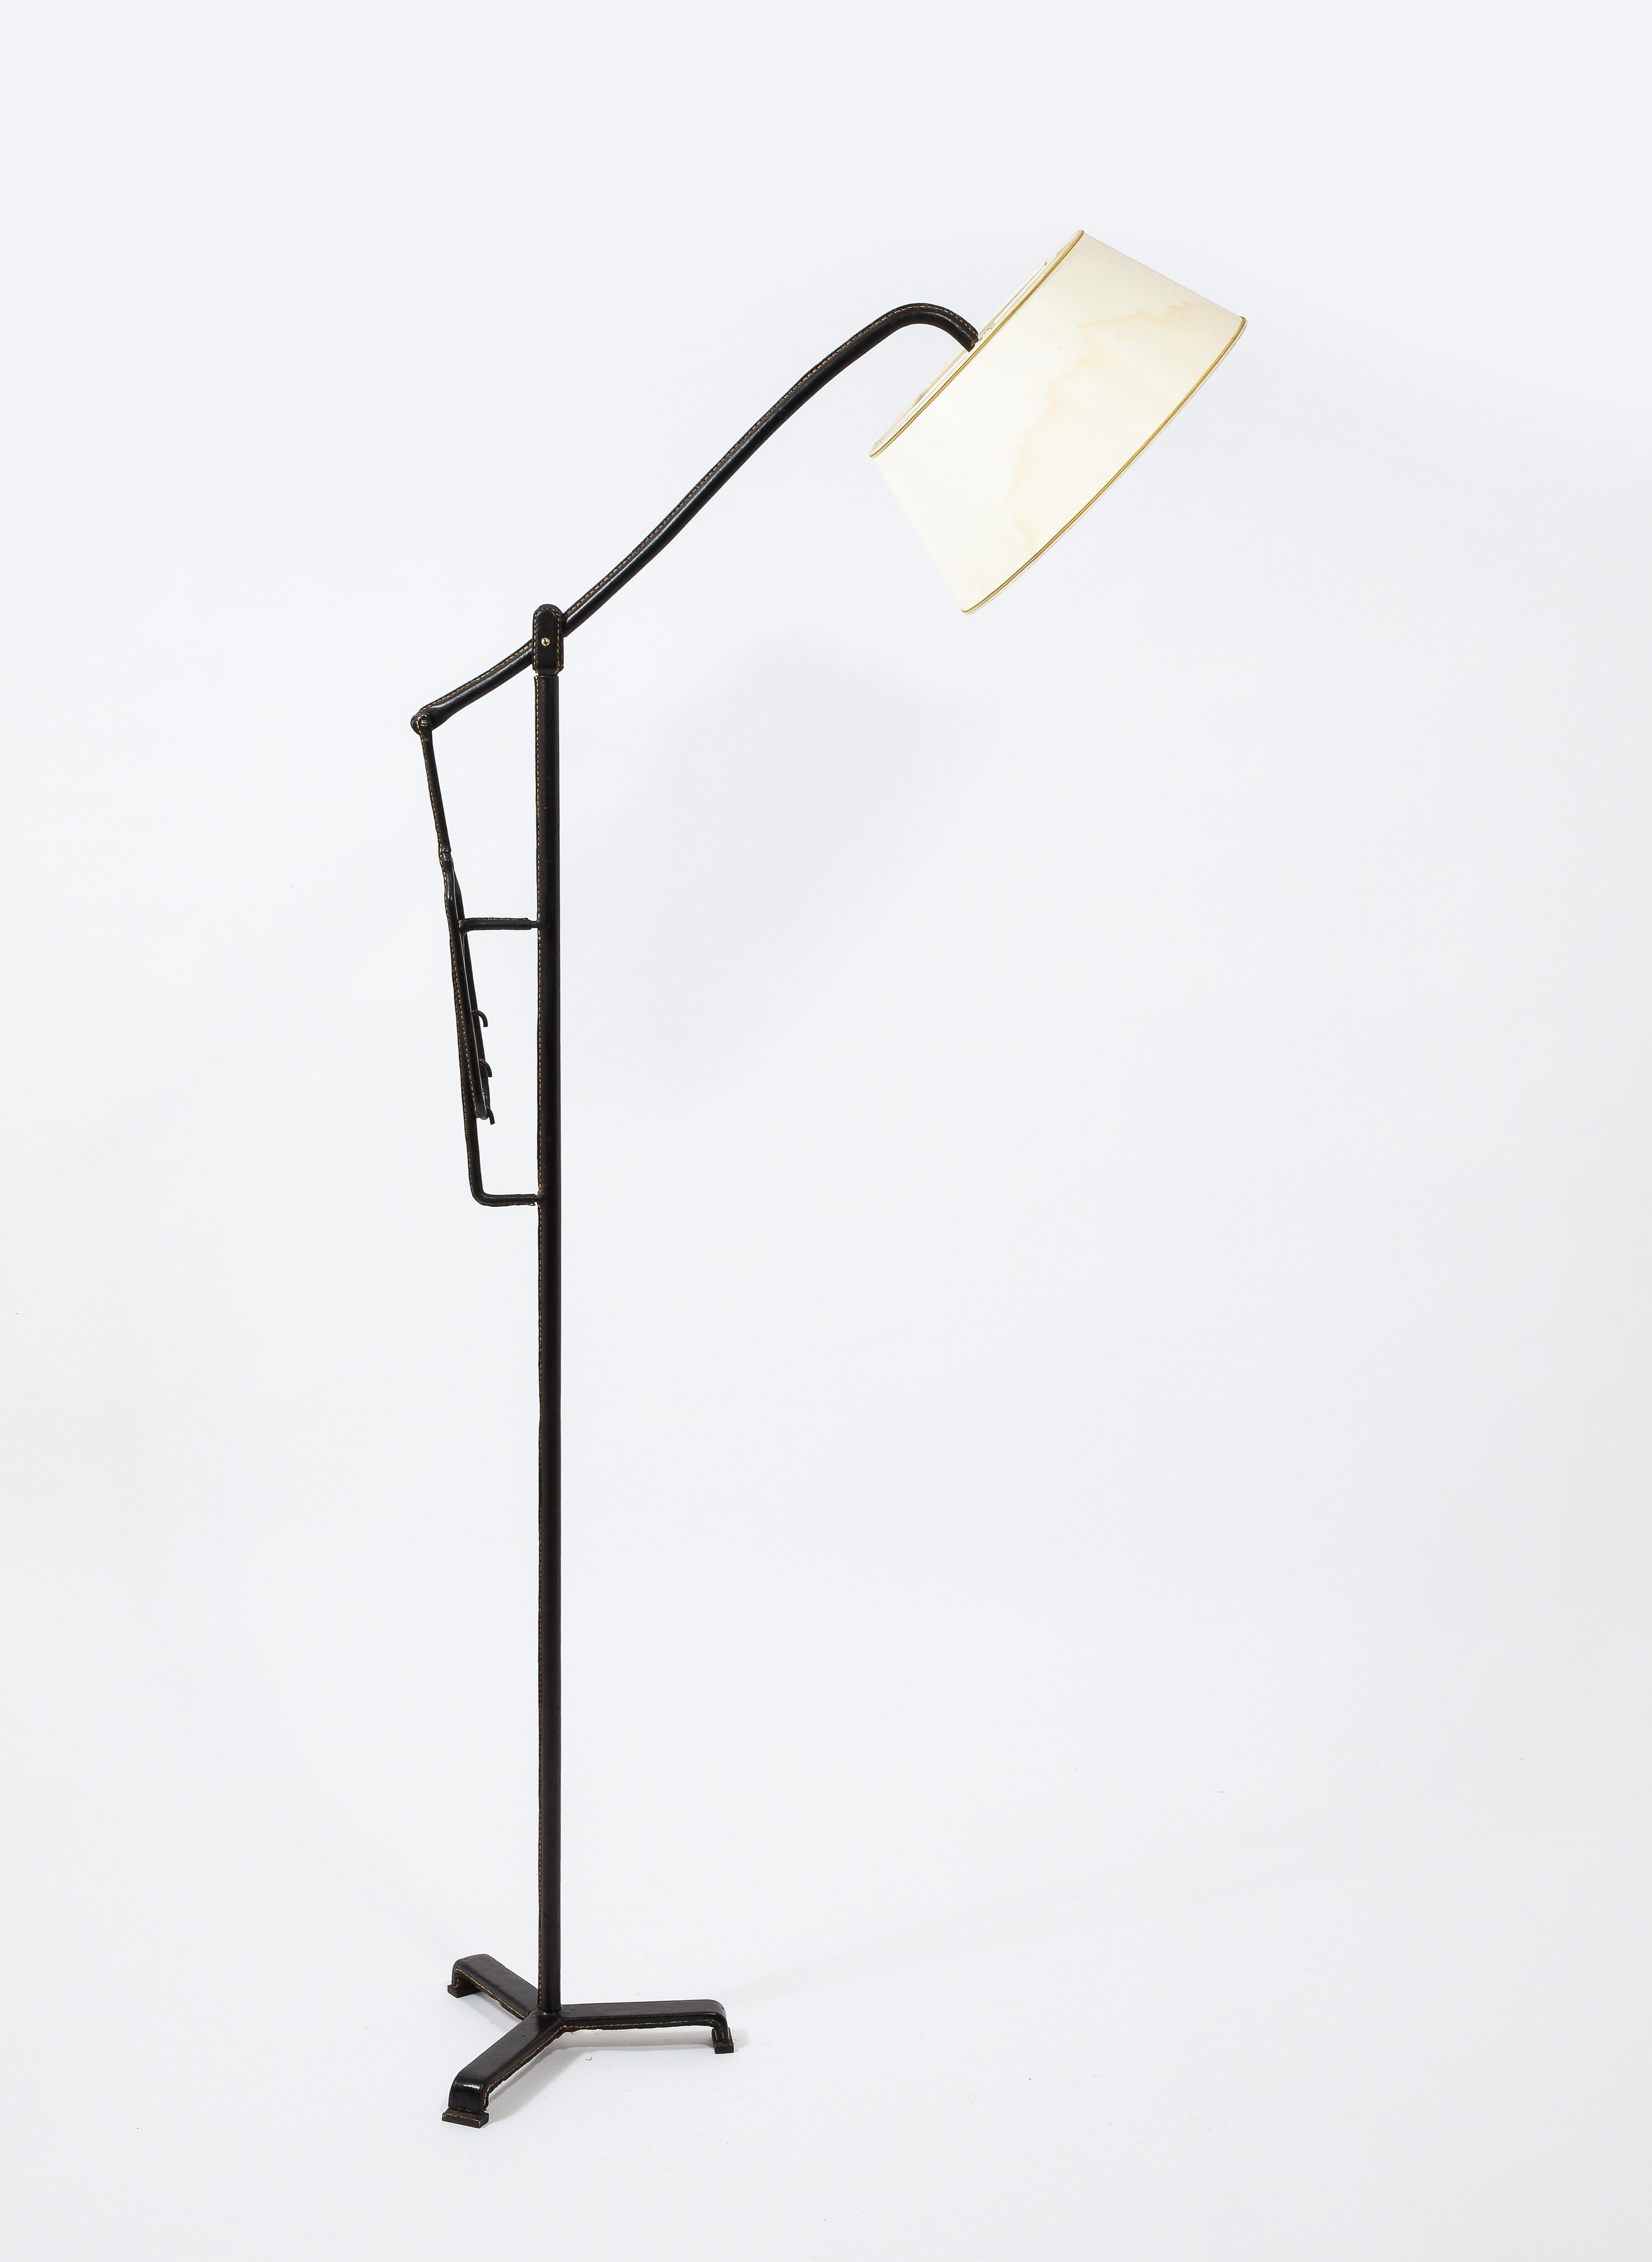 Iron Jacques Adnet Black Leather Potence Floor Lamp, France 1940's For Sale